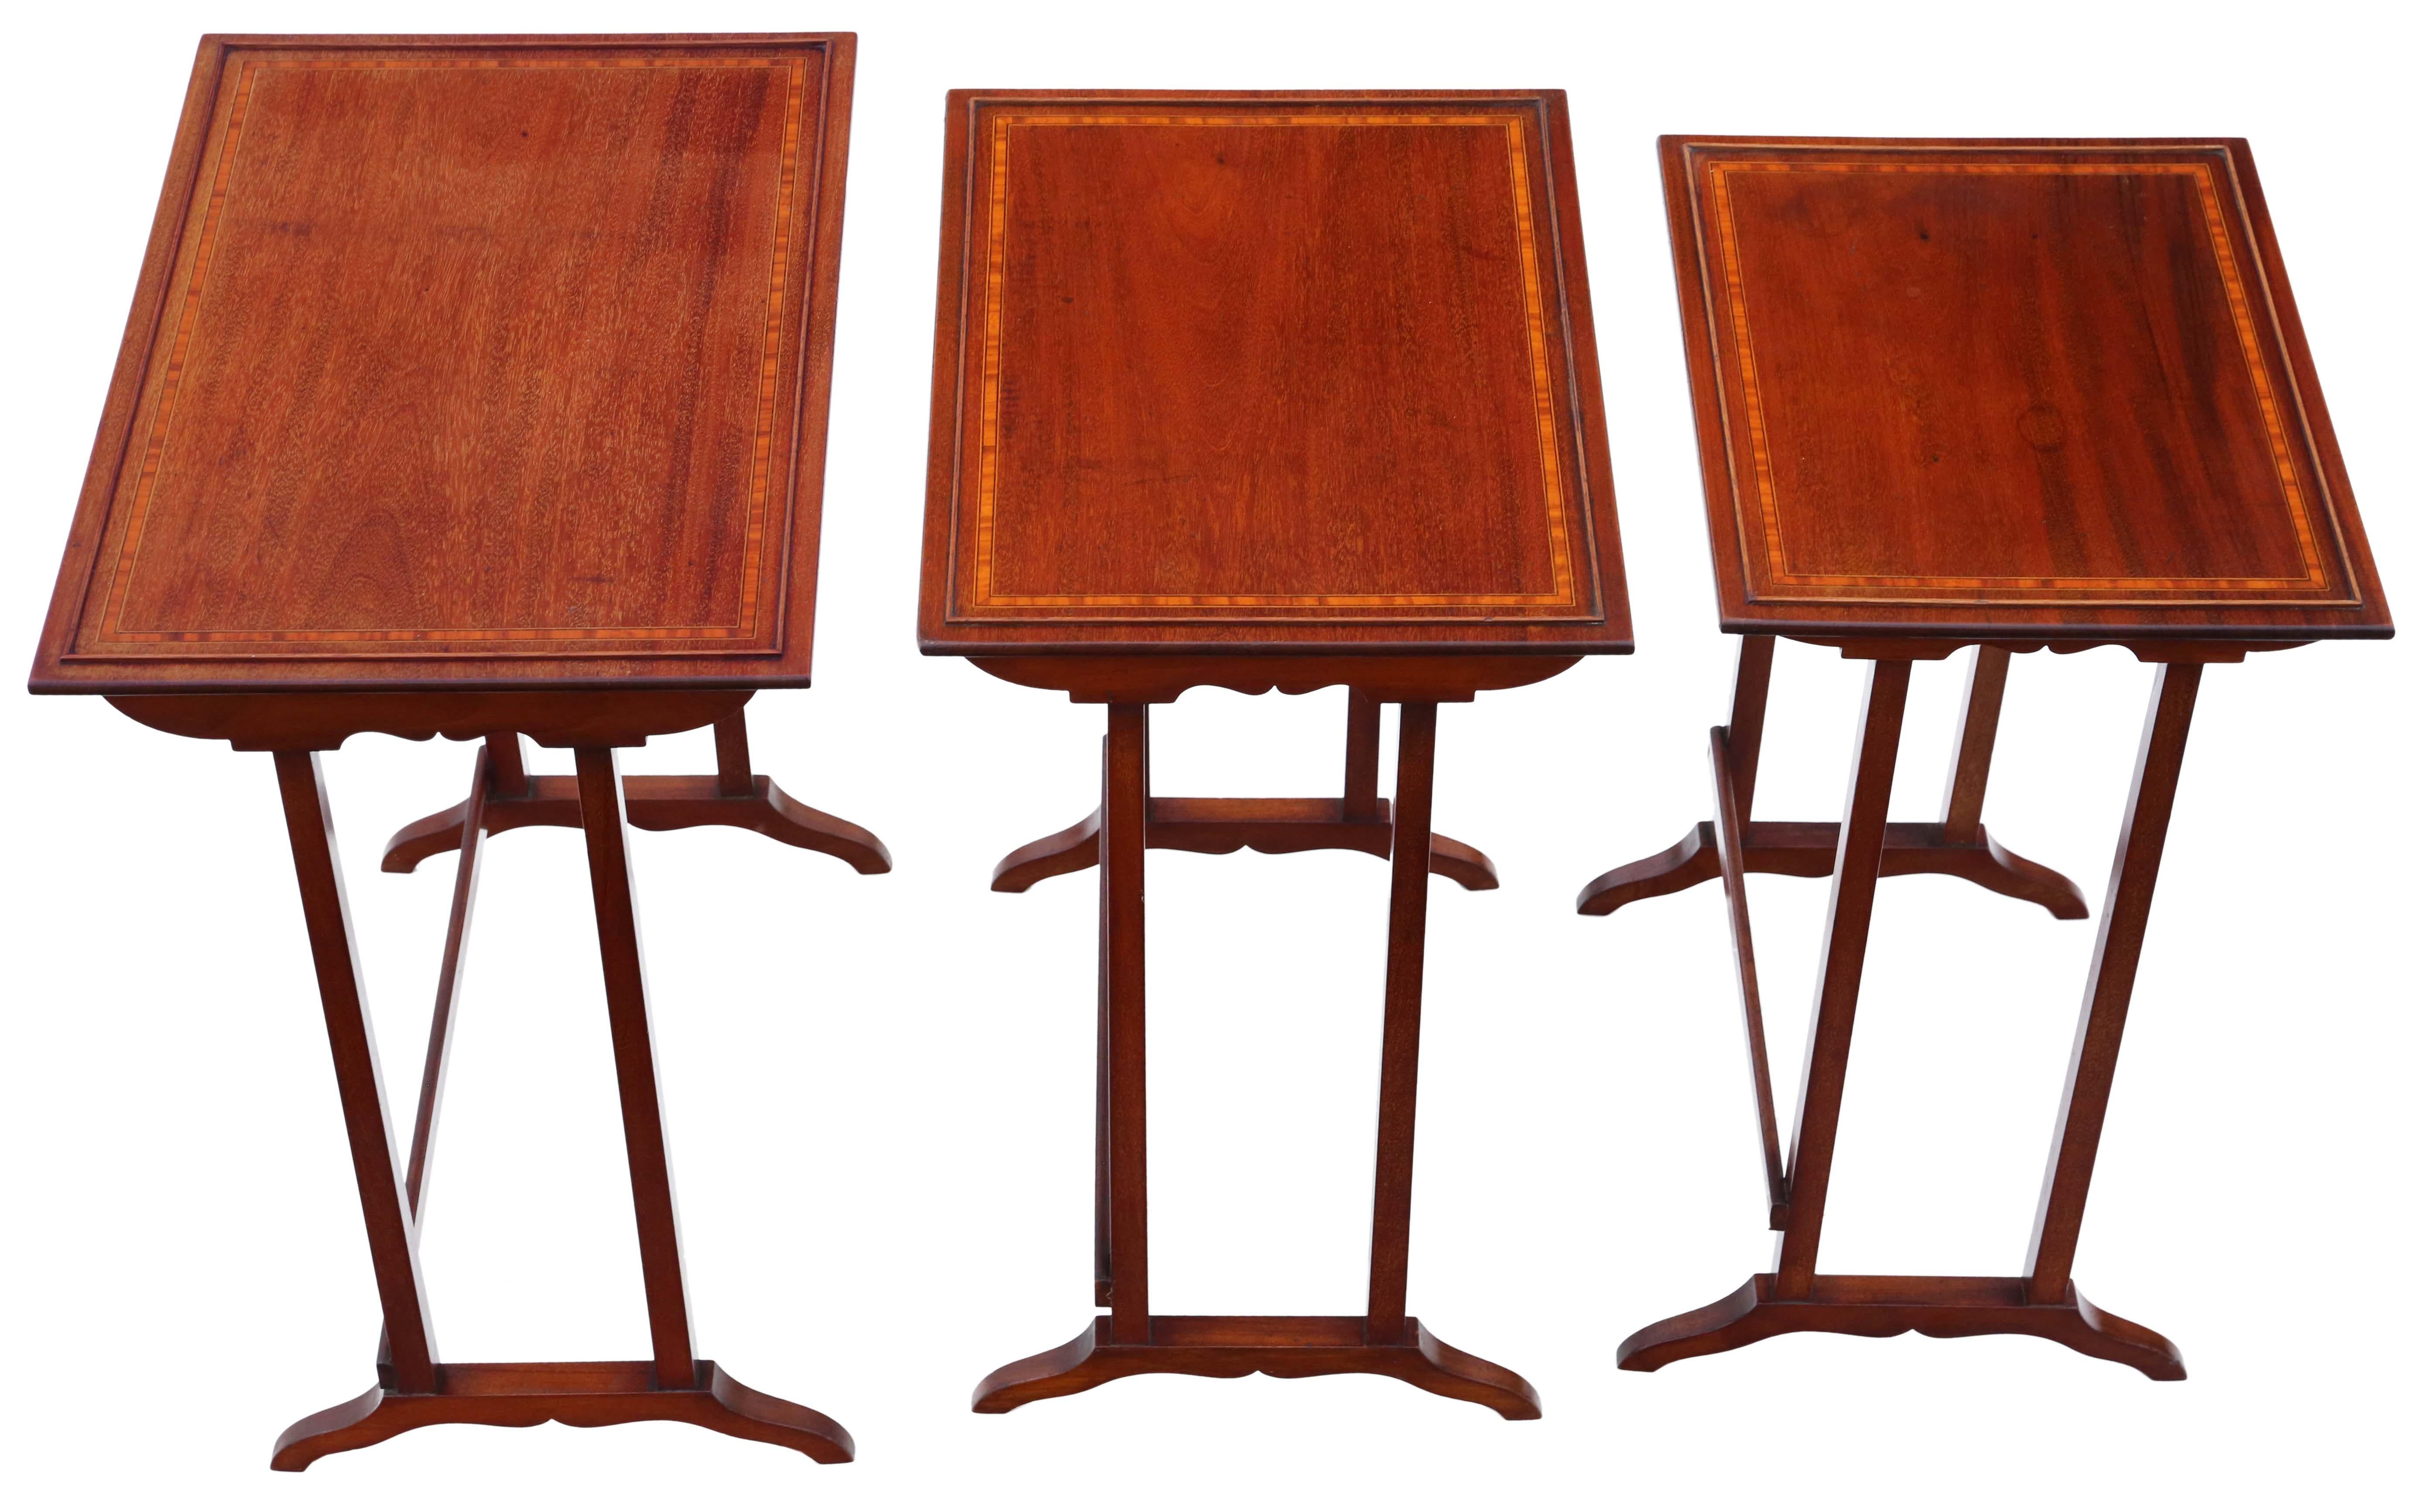 Early 20th Century Antique fine quality mahogany nest of 3 Edwardian C1905 tables